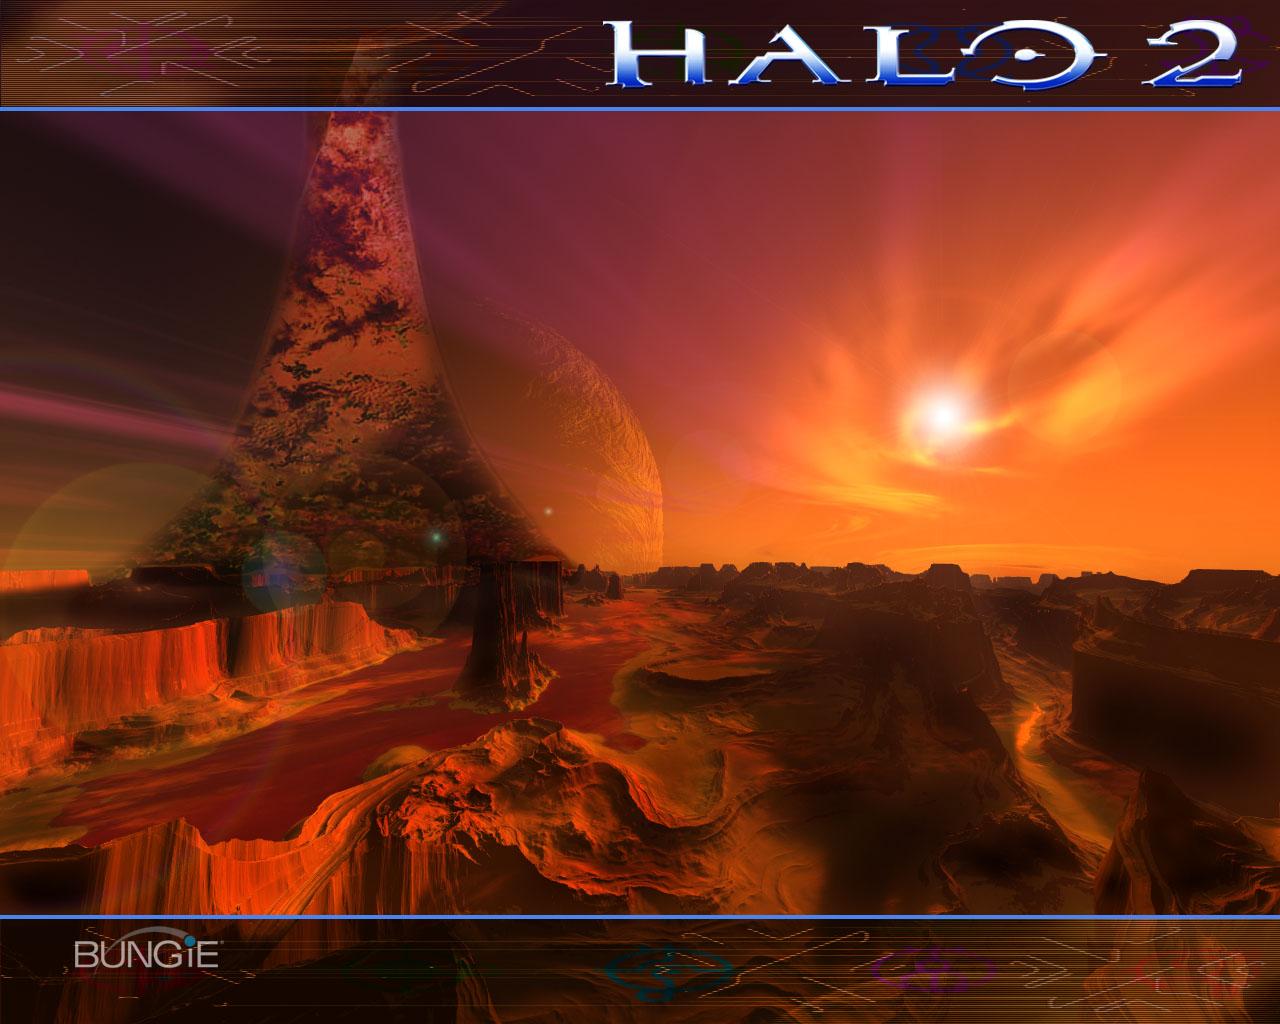 Halo 2 Wallpaper for iPhone